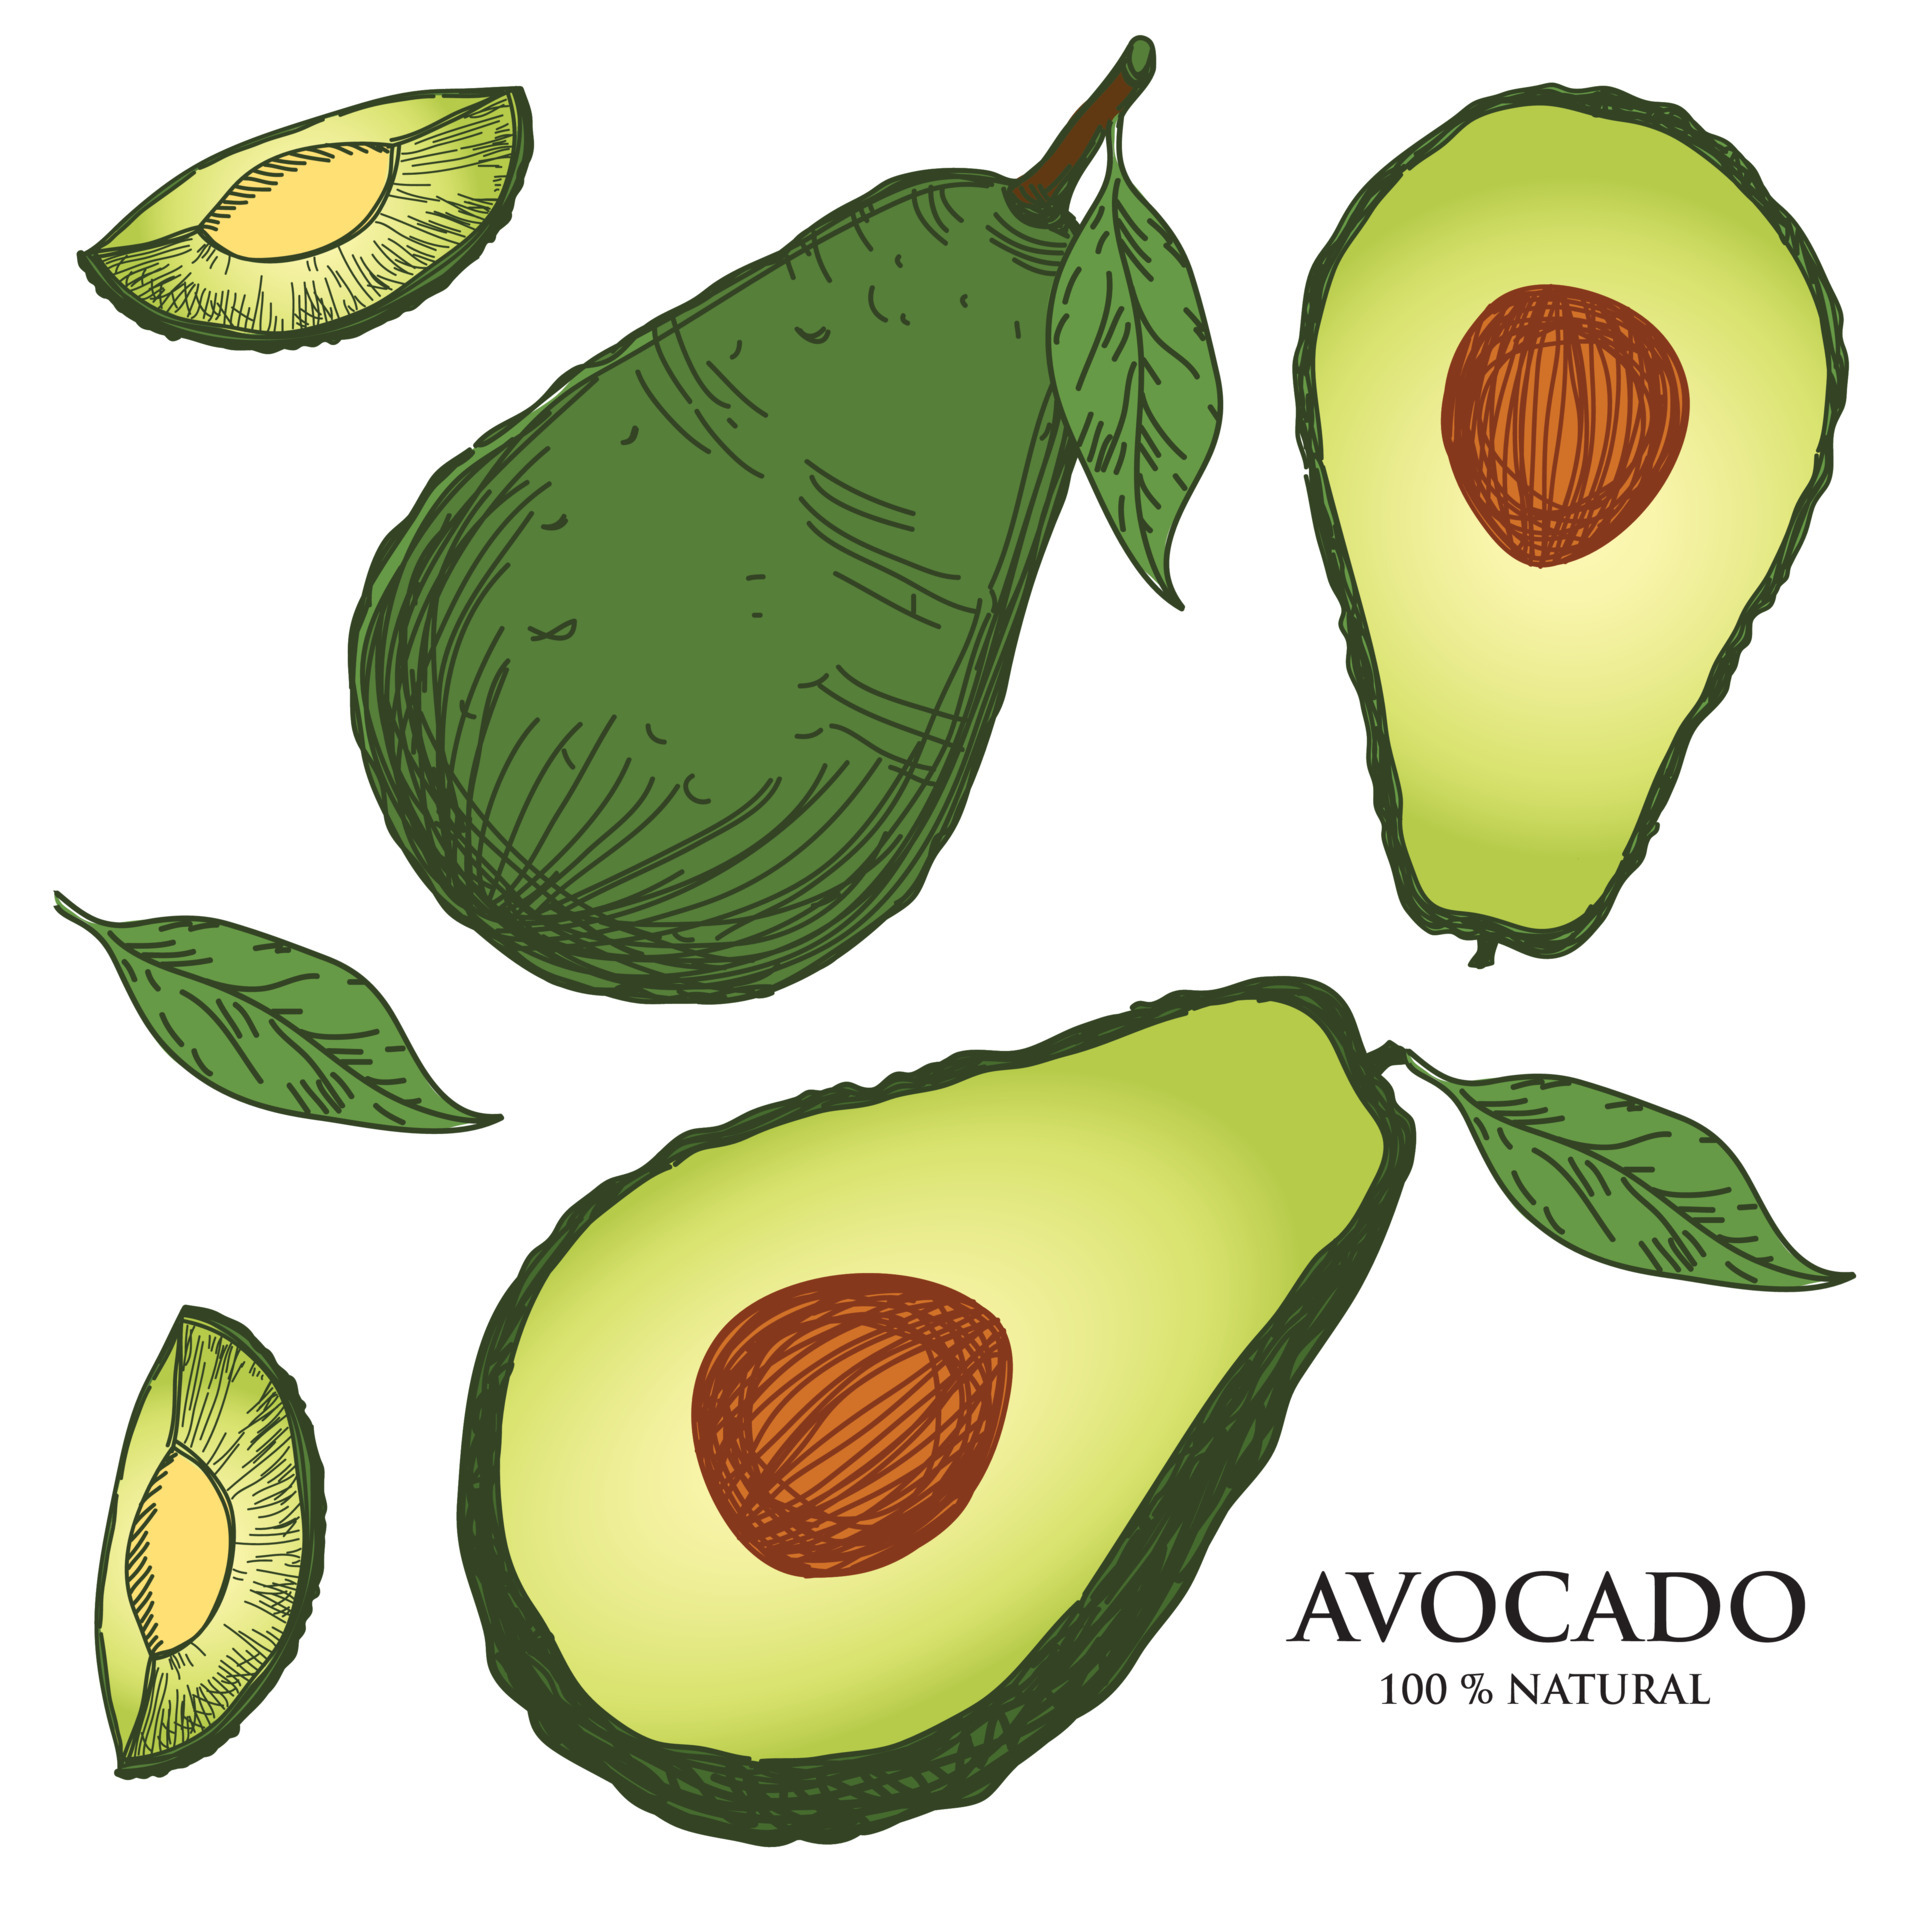 Avocado Illustration Images  Free Photos PNG Stickers Wallpapers   Backgrounds  rawpixel